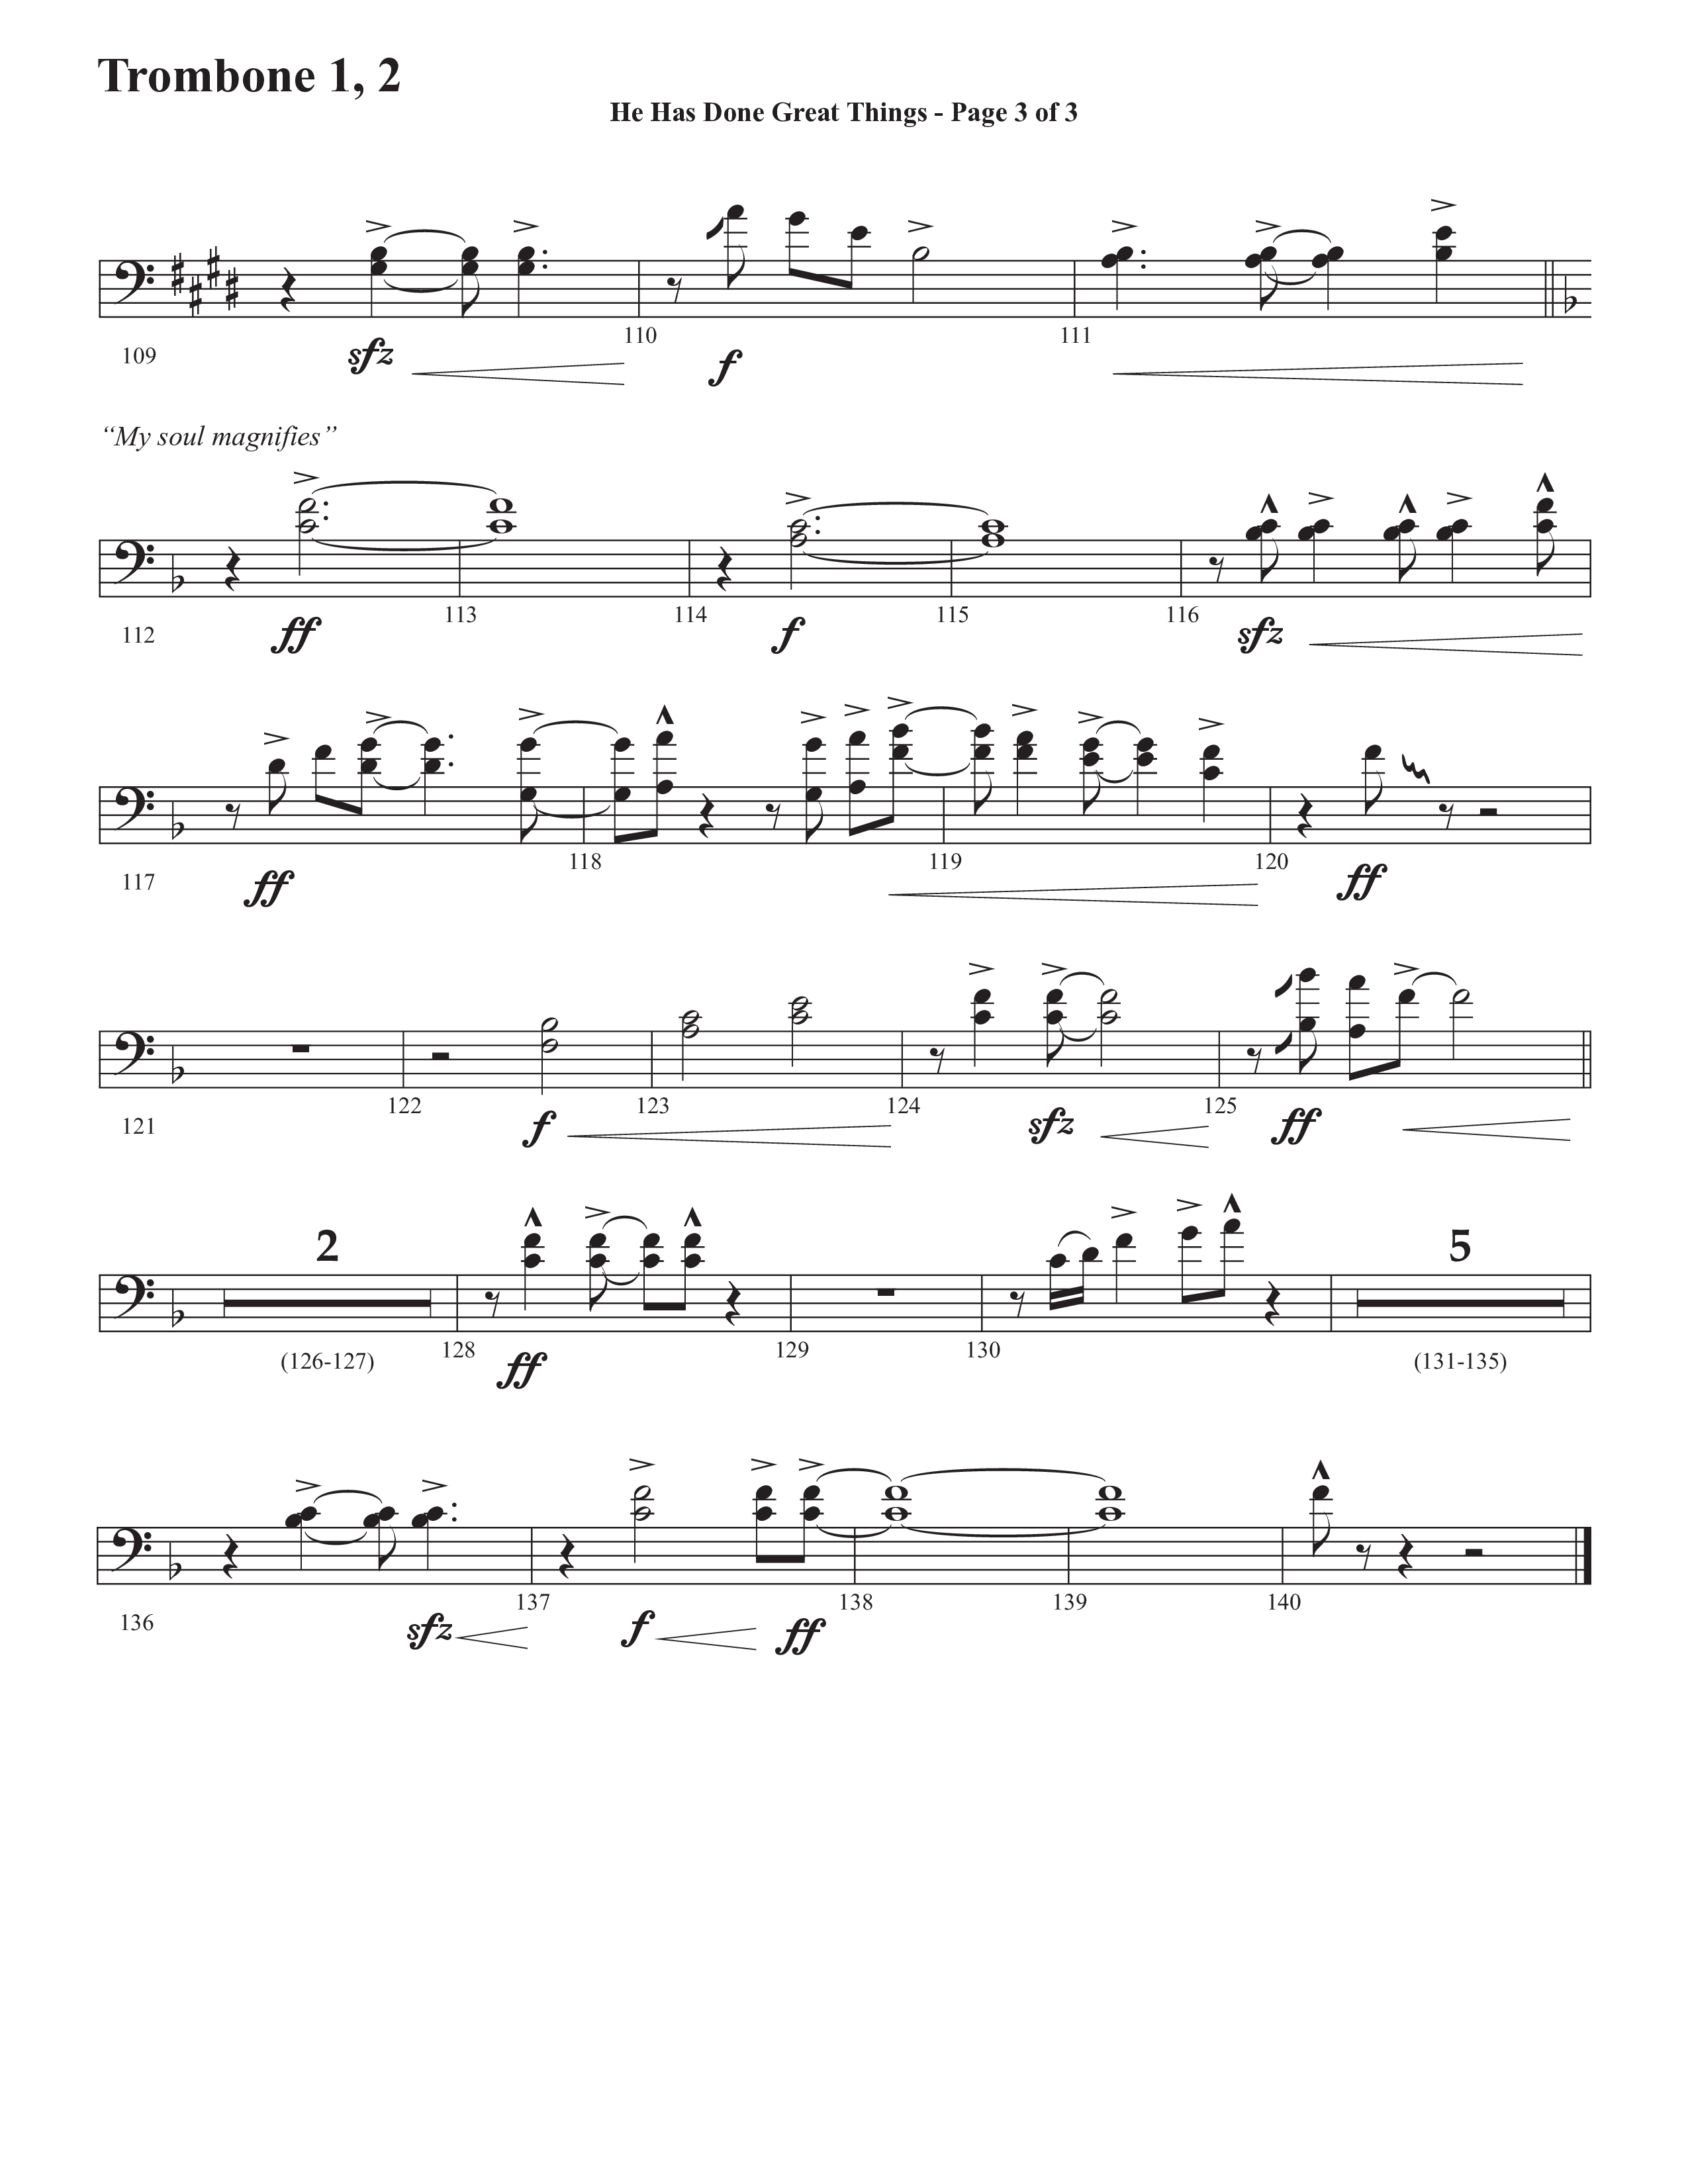 He Has Done Great Things (The Magnificat) (Choral Anthem SATB) Trombone 1/2 (Semsen Music / Arr. John Bolin / Orch. Cliff Duren)